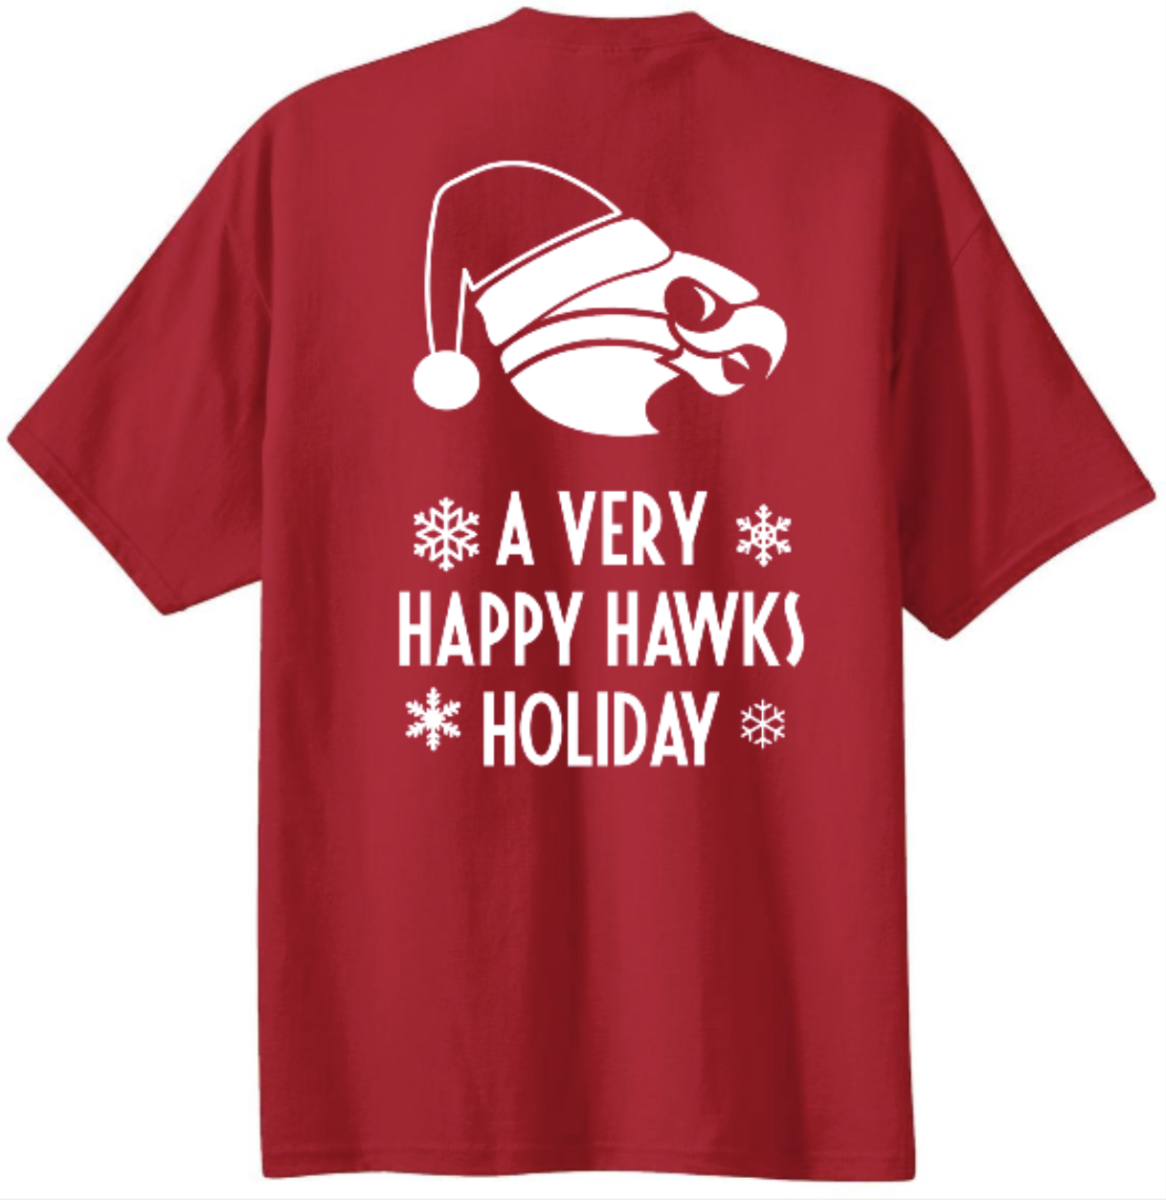 Order Your MTHS Holiday Hawk 2023 Shirt by Friday 12/8